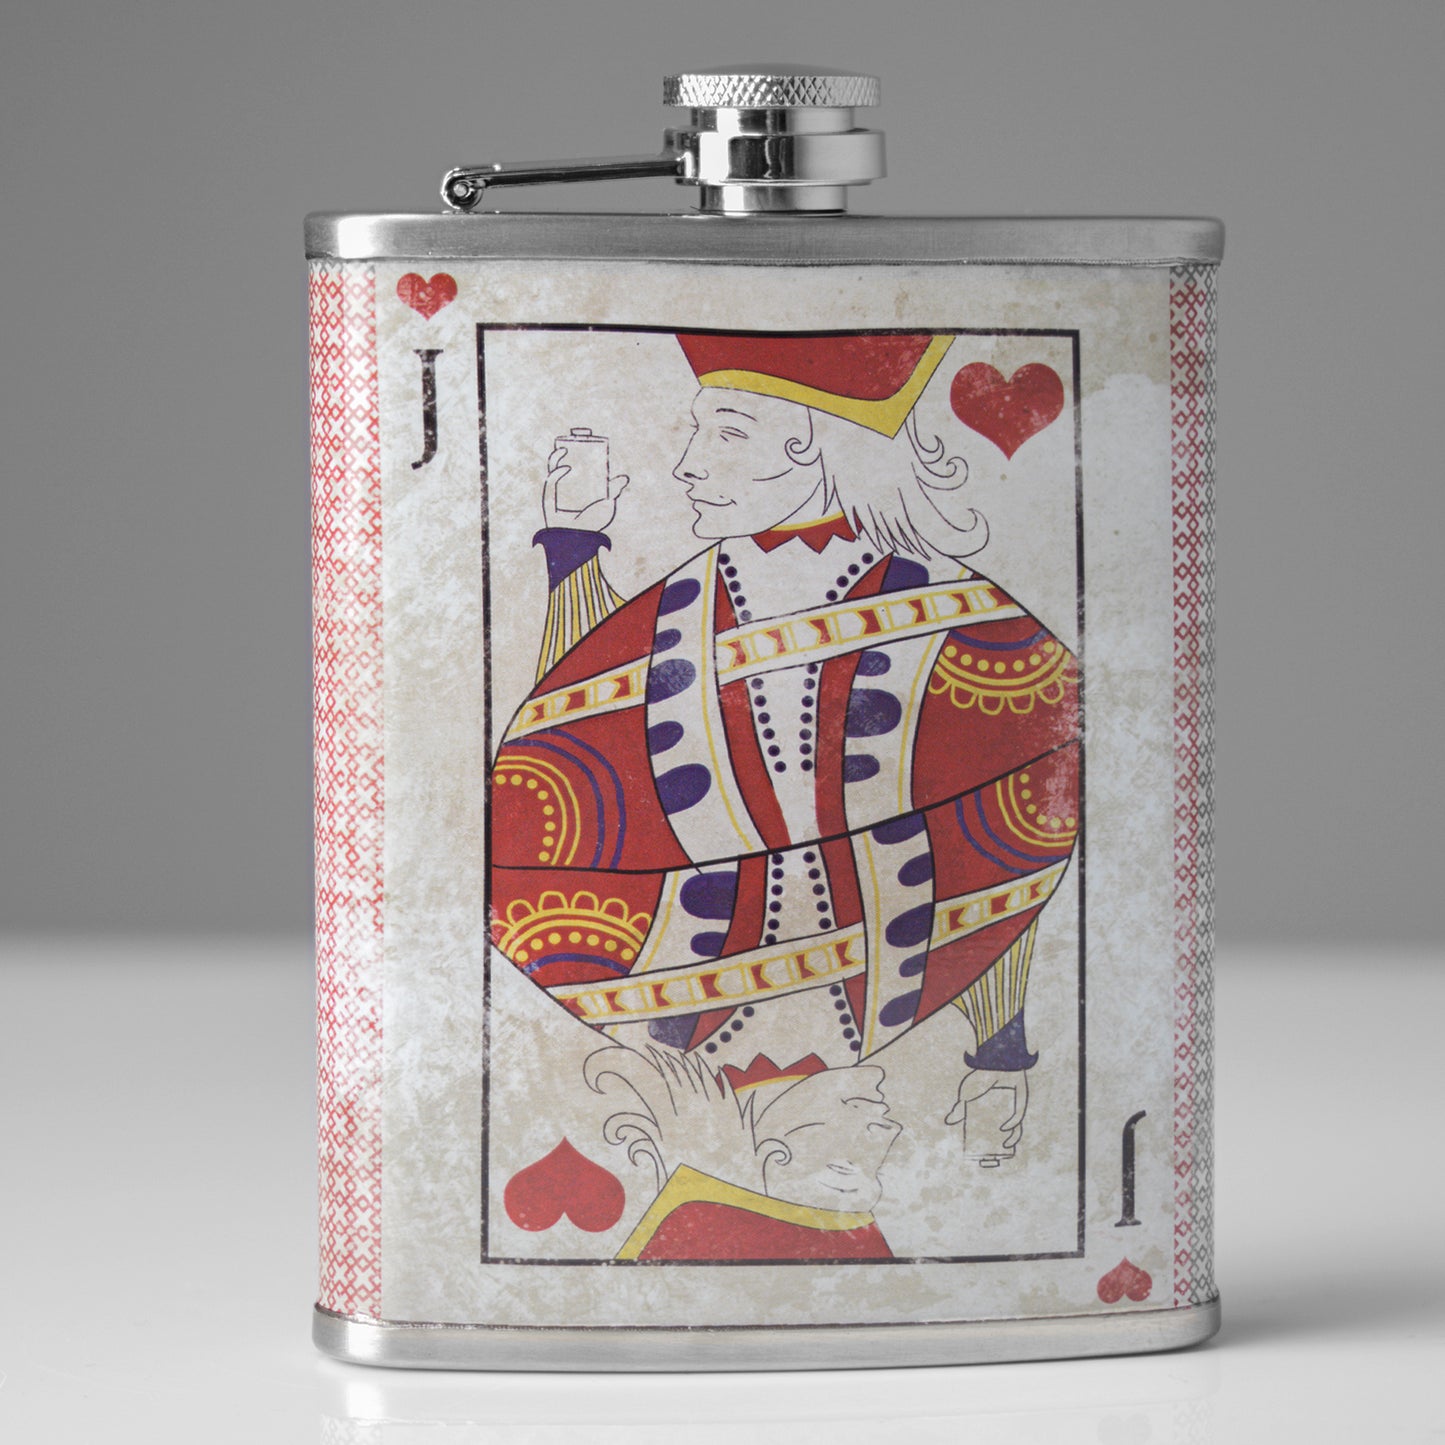 Jack of Hearts Stainless Steel 8 oz Liquor Flask